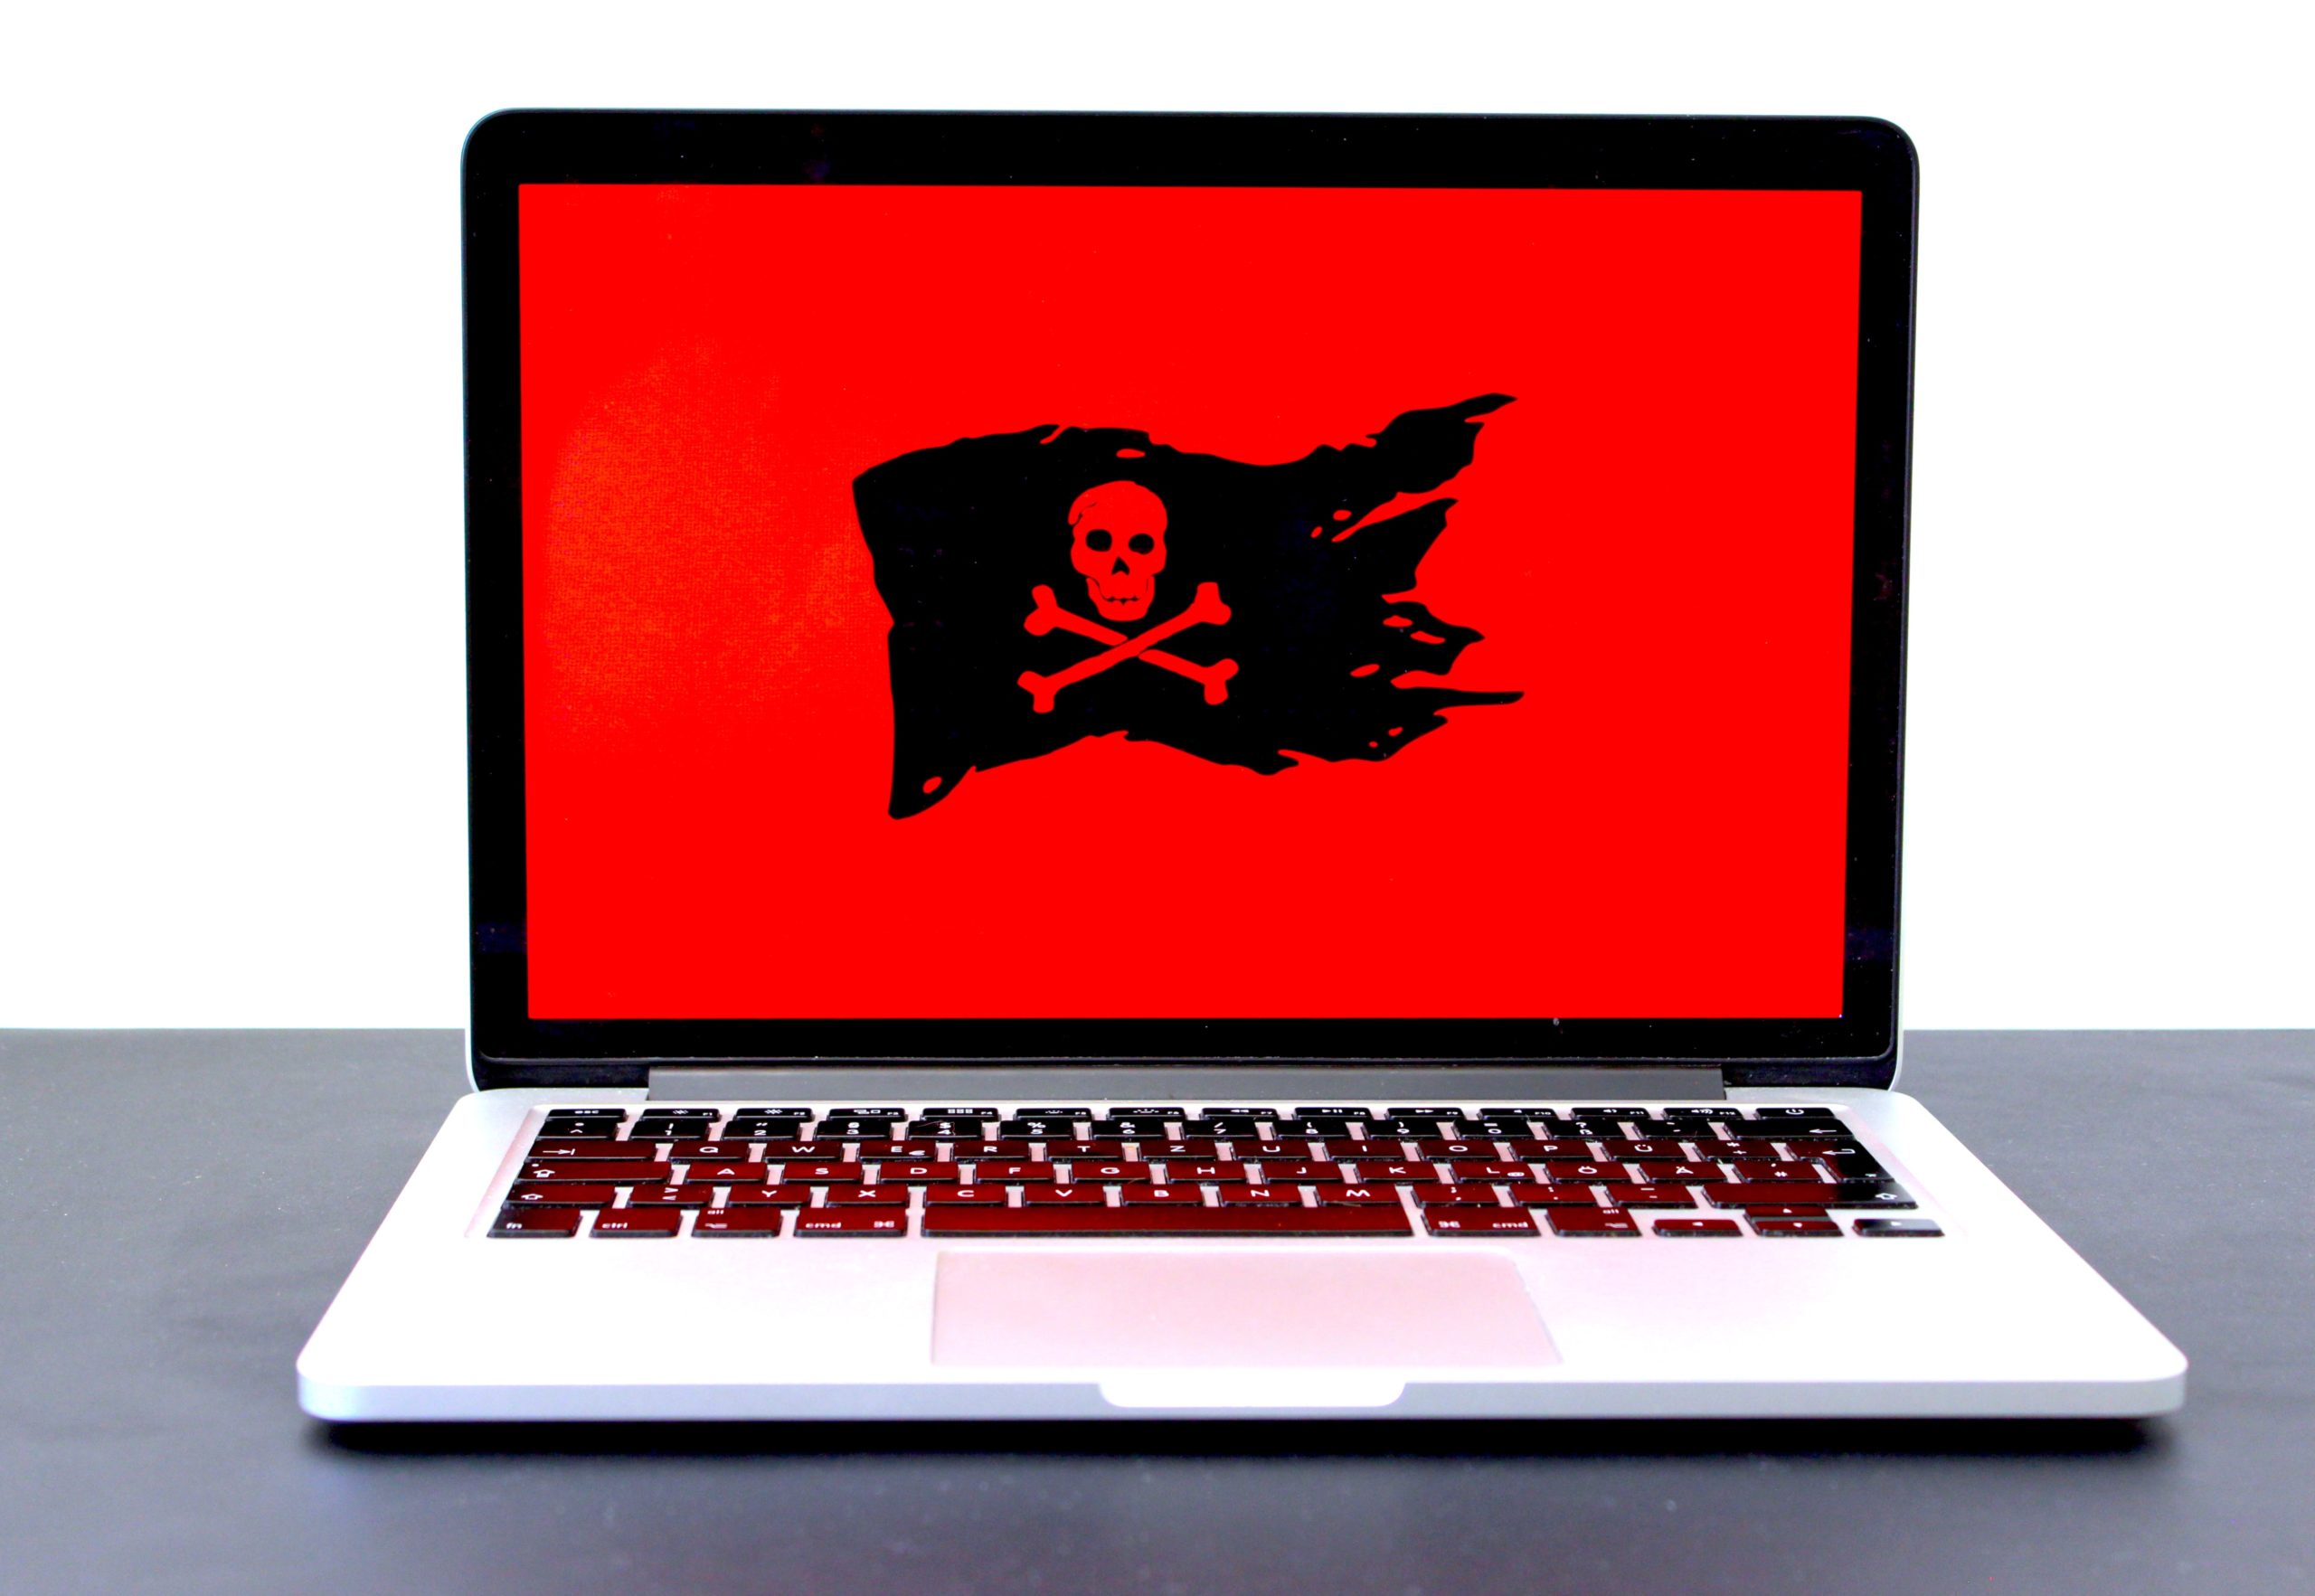 A laptop screen shows nothing but a black pirate flag against a bright red background.